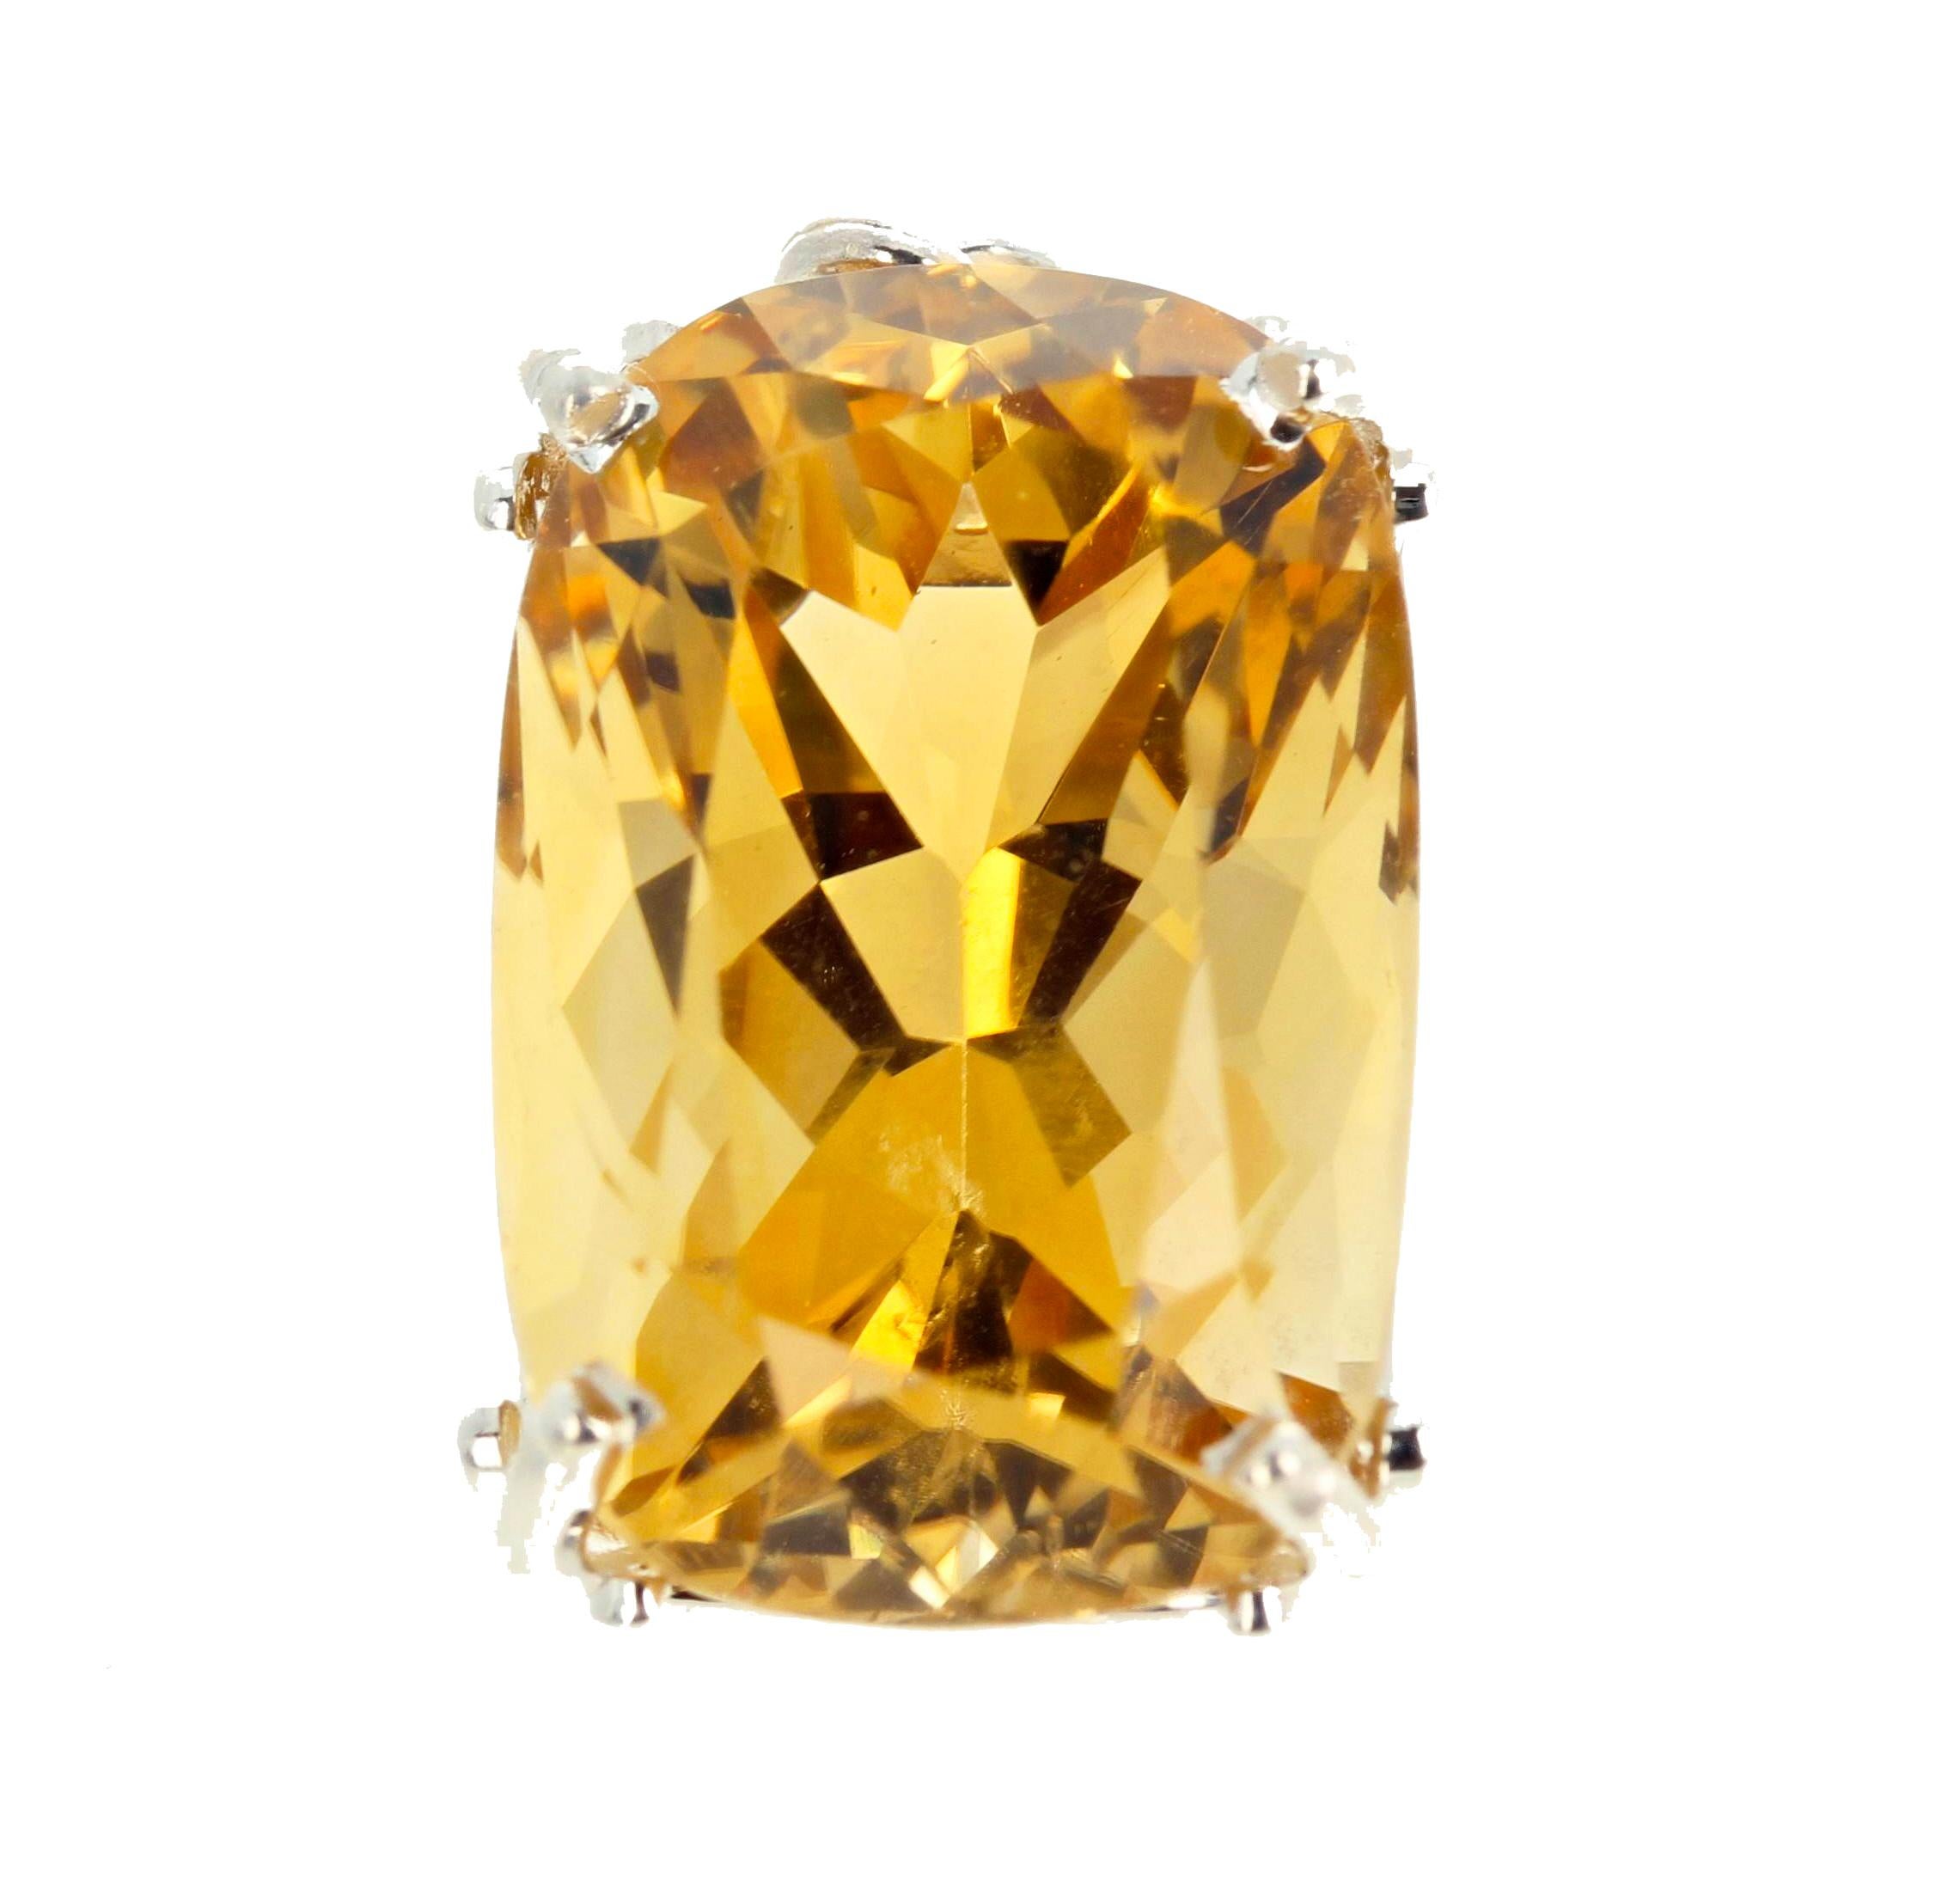 Glittering yellow goldy cushion cut 27.85 carat Madagascar Citrine - 22 mm x 16 mm - set in this lovely sterling silver pendant that hangs approximately 1 1/2 inches long.  